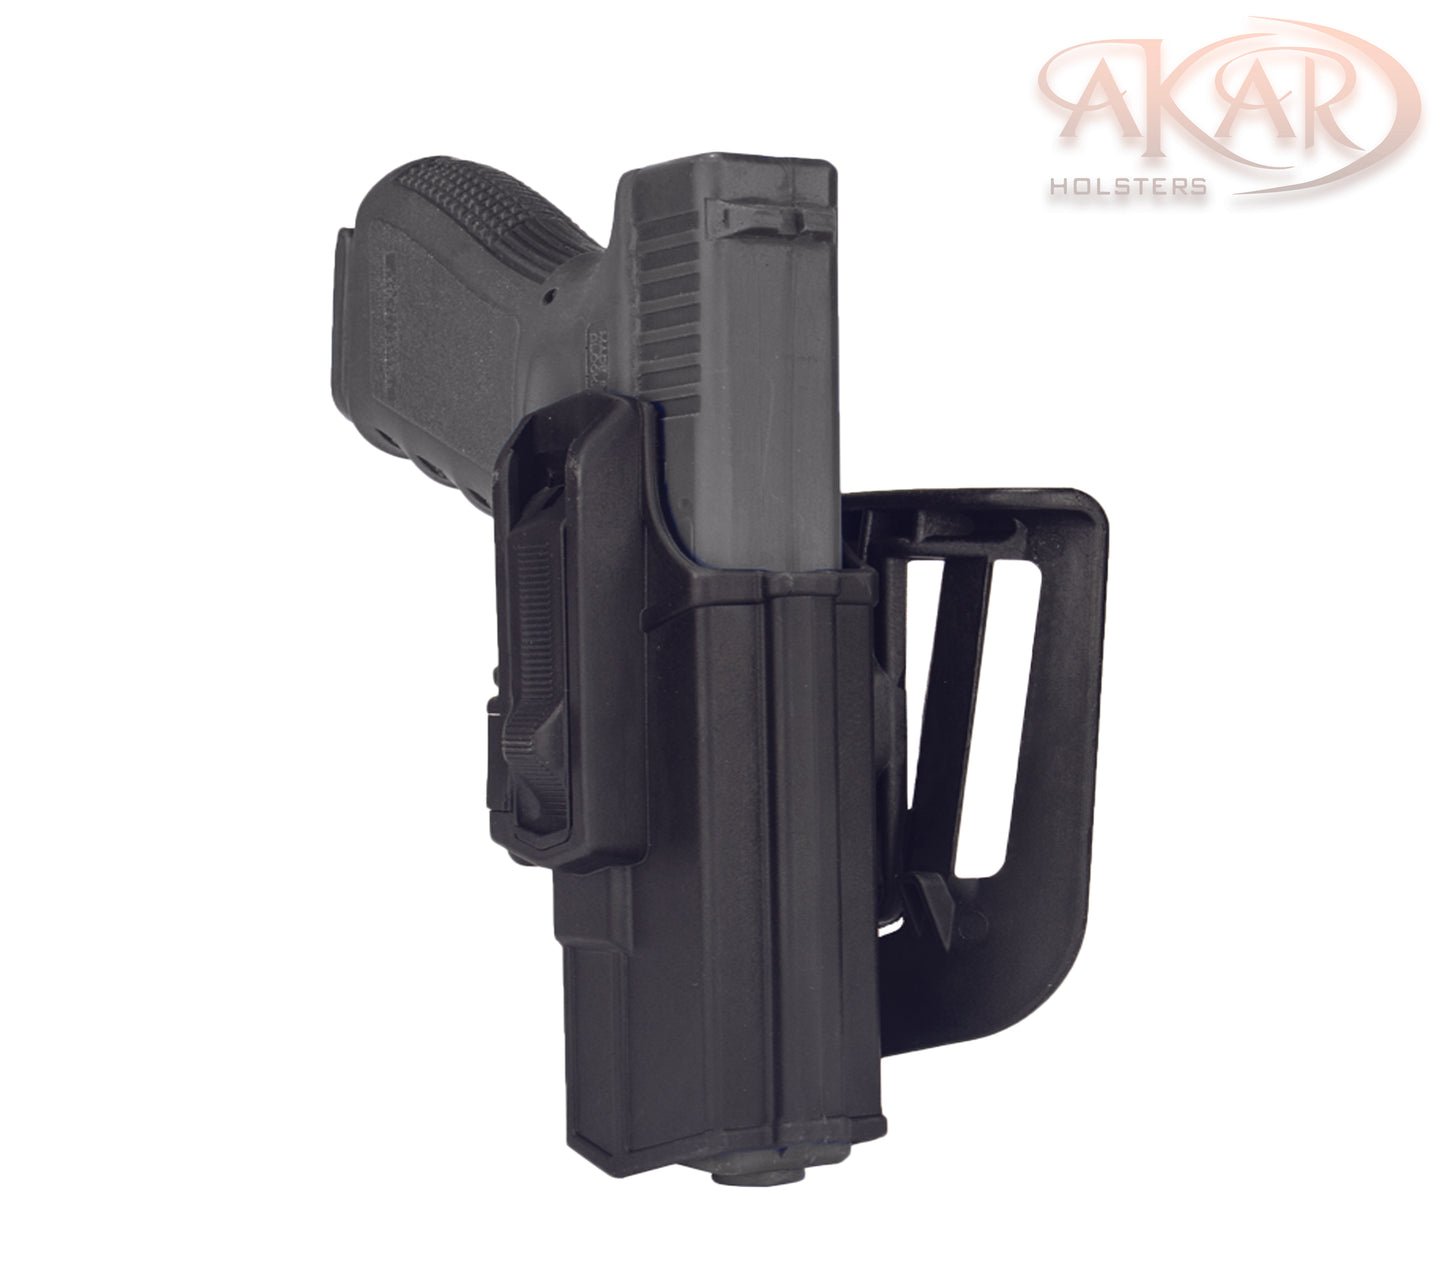 OWB HOLSTER FITS GLOCK 14,17,19,20,44 Polymer Outside The Waistband Carry Belt Holster With 360° Adjustable Paddle-Right Hand Slide Release Retention